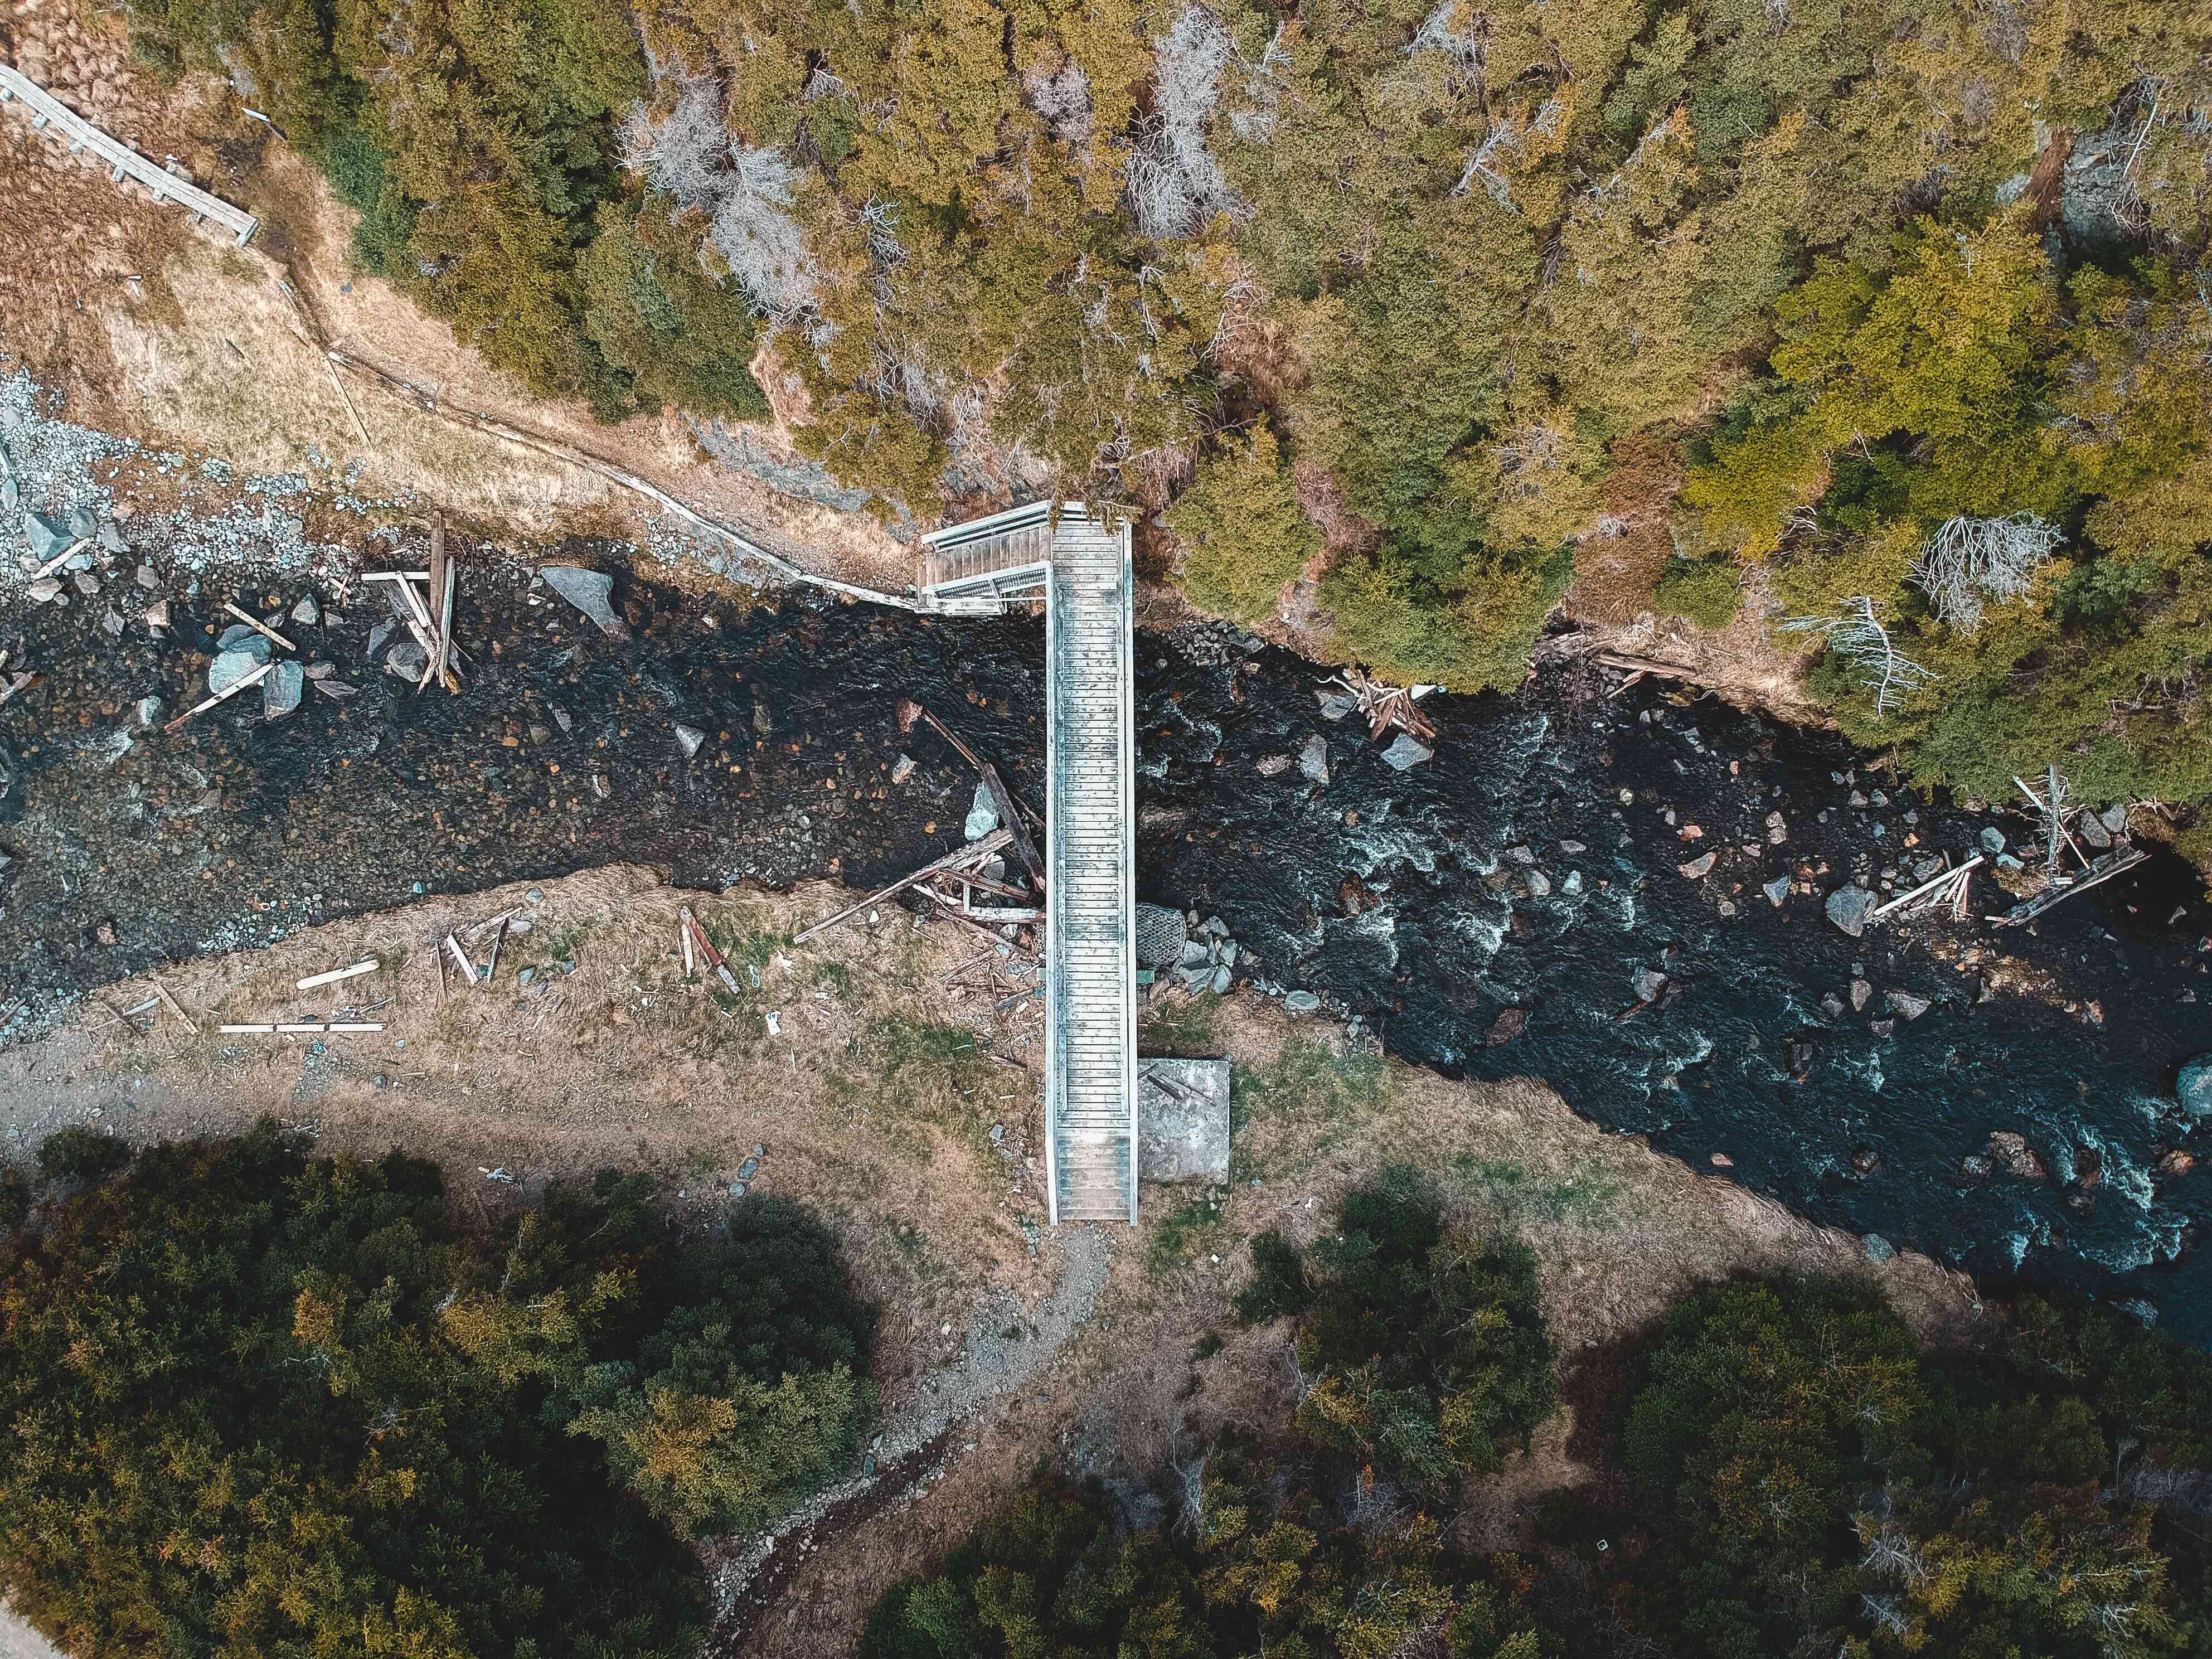 Bridge connecting two pieces of land separated by a river